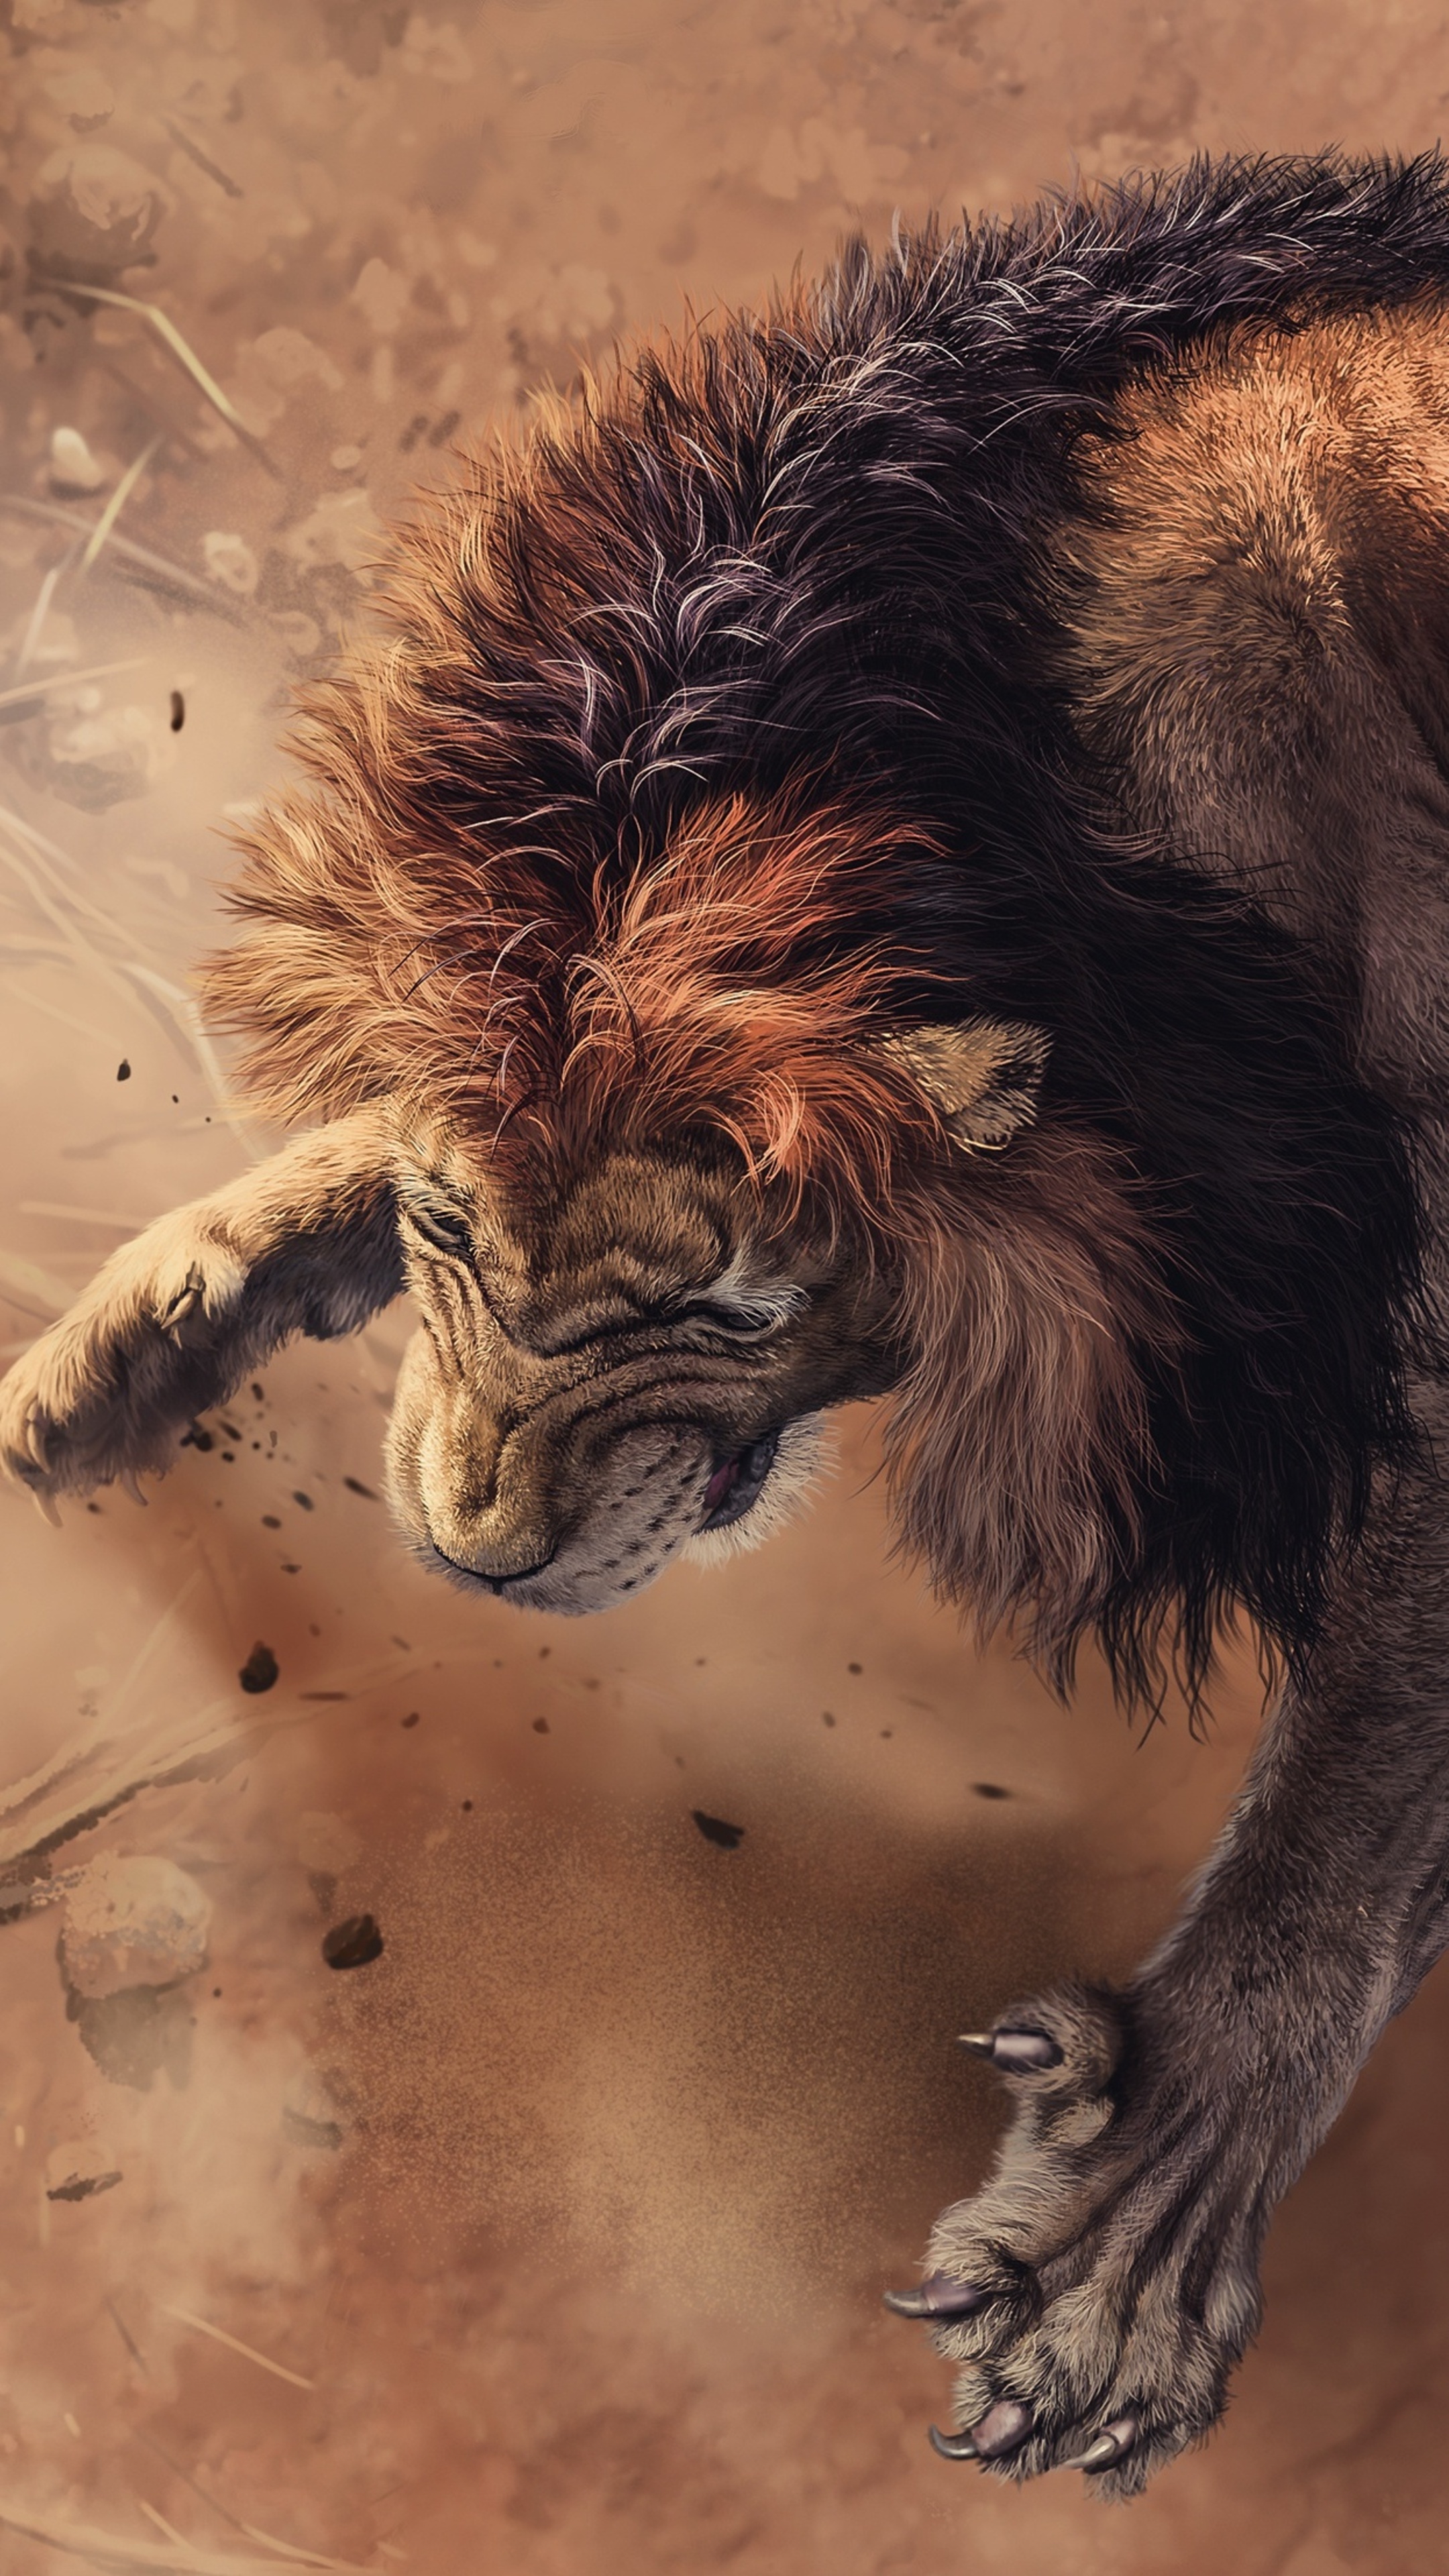 Angry Lion wallpaper by Fuxya  Download on ZEDGE  8c0d